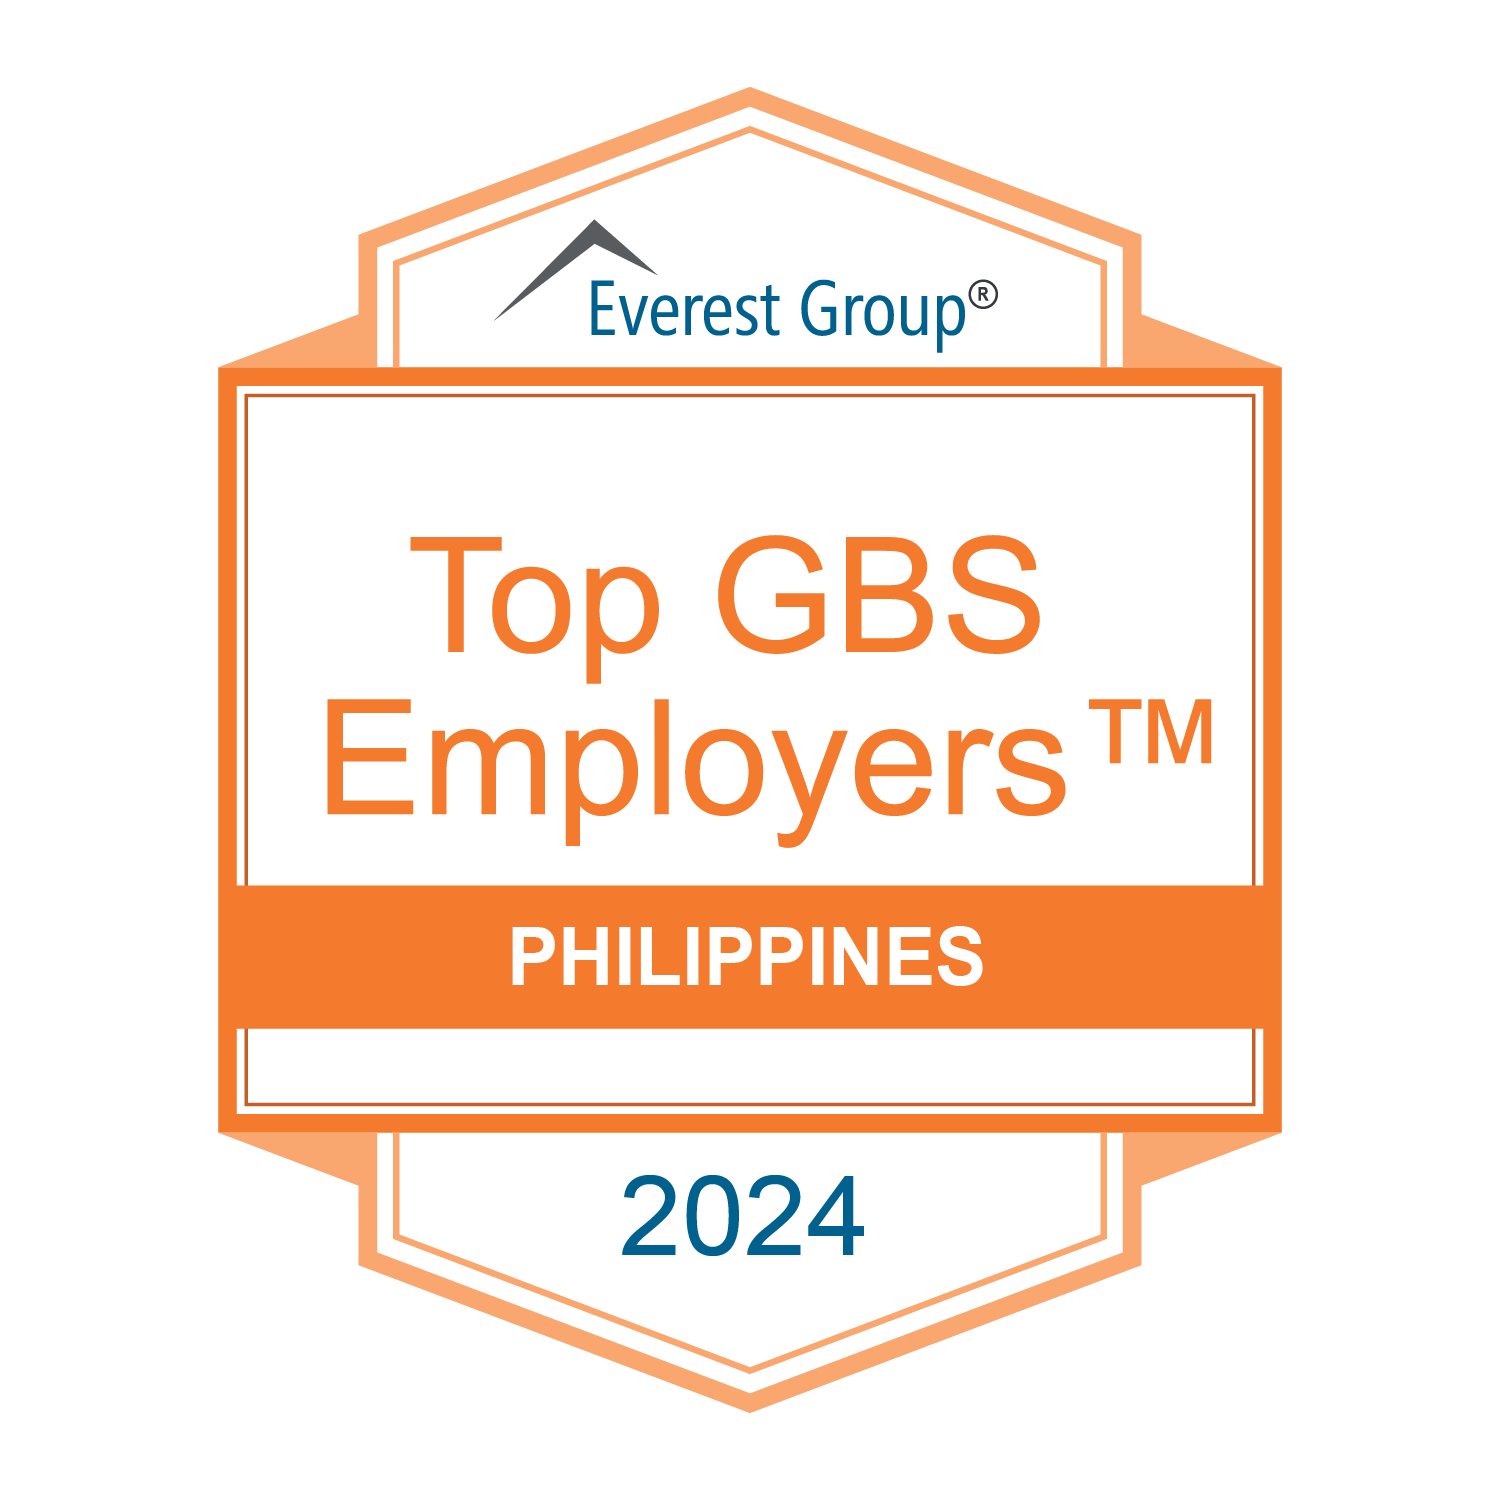 Everest Group Top GBS Employers Philippines 2024